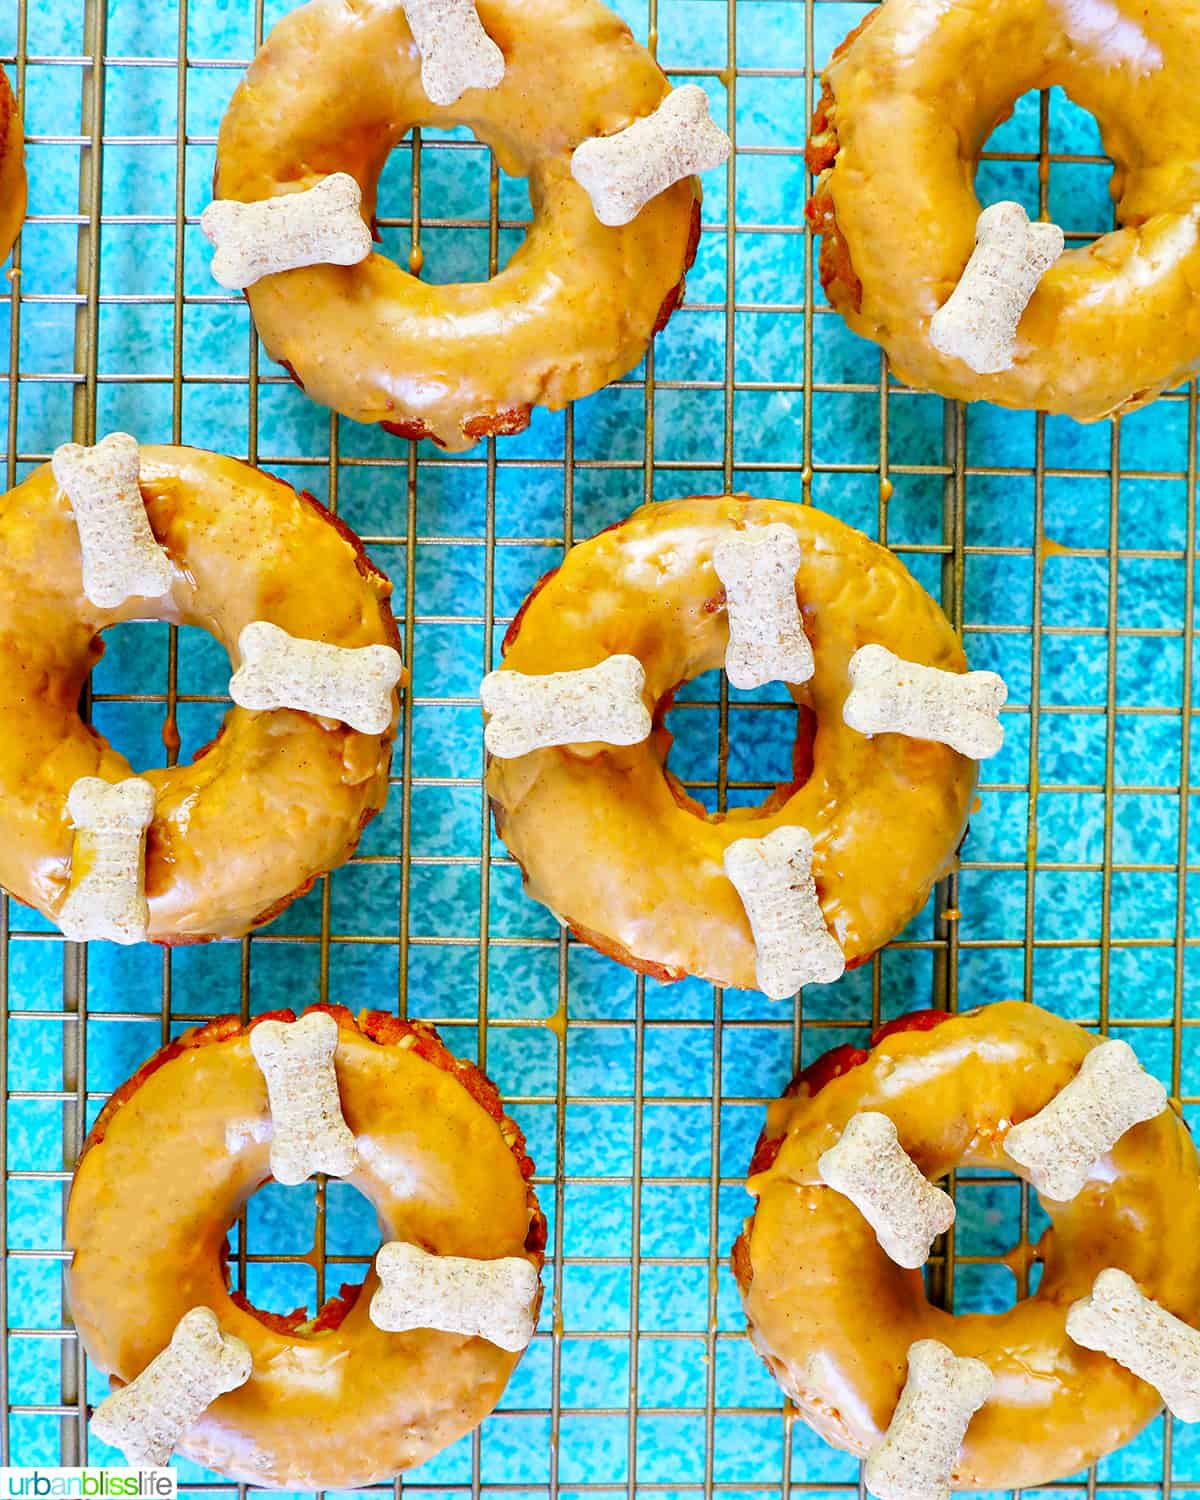 Glazed dog donuts with dog biscuits on a cooling rack on a bright blue table.